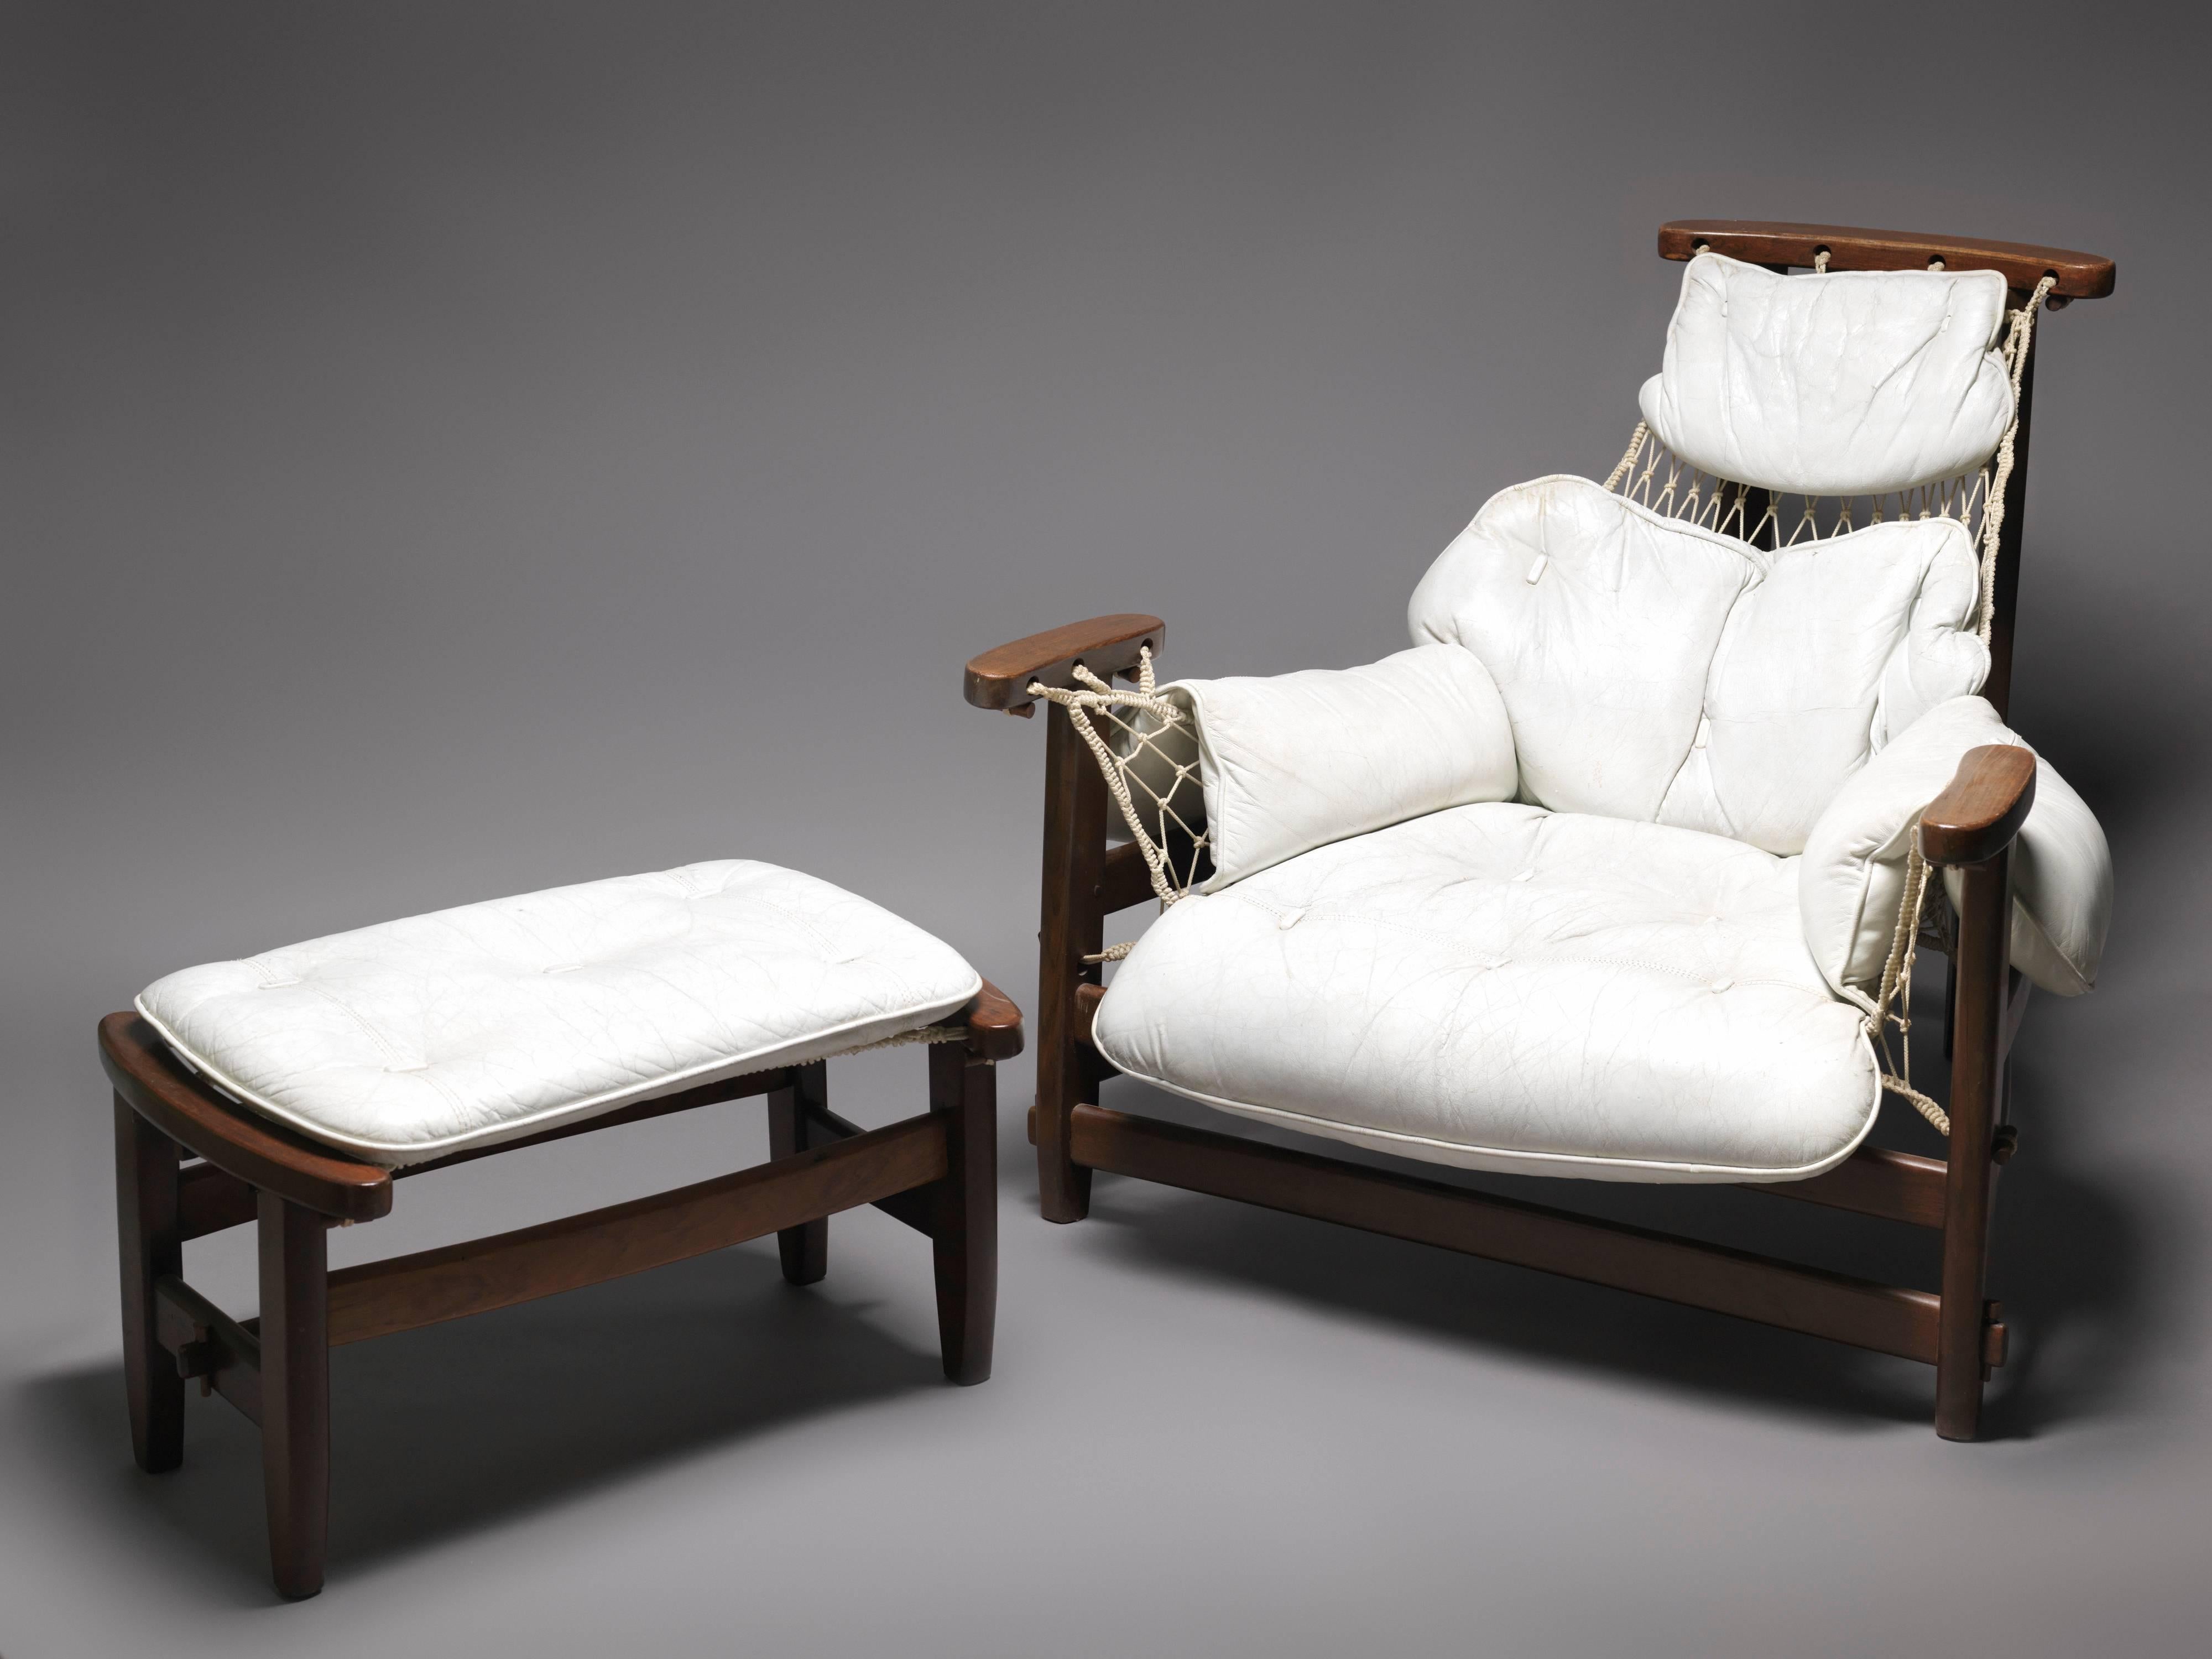 This fabulous easy chair was designed by Jean Gillon for Wood Art, Brazil in 1962. This amazing chair is made of organic shaped Jacaranda wood and has a rope seat that resembles a fishing net. The seats of the armchair and ottoman are filled with